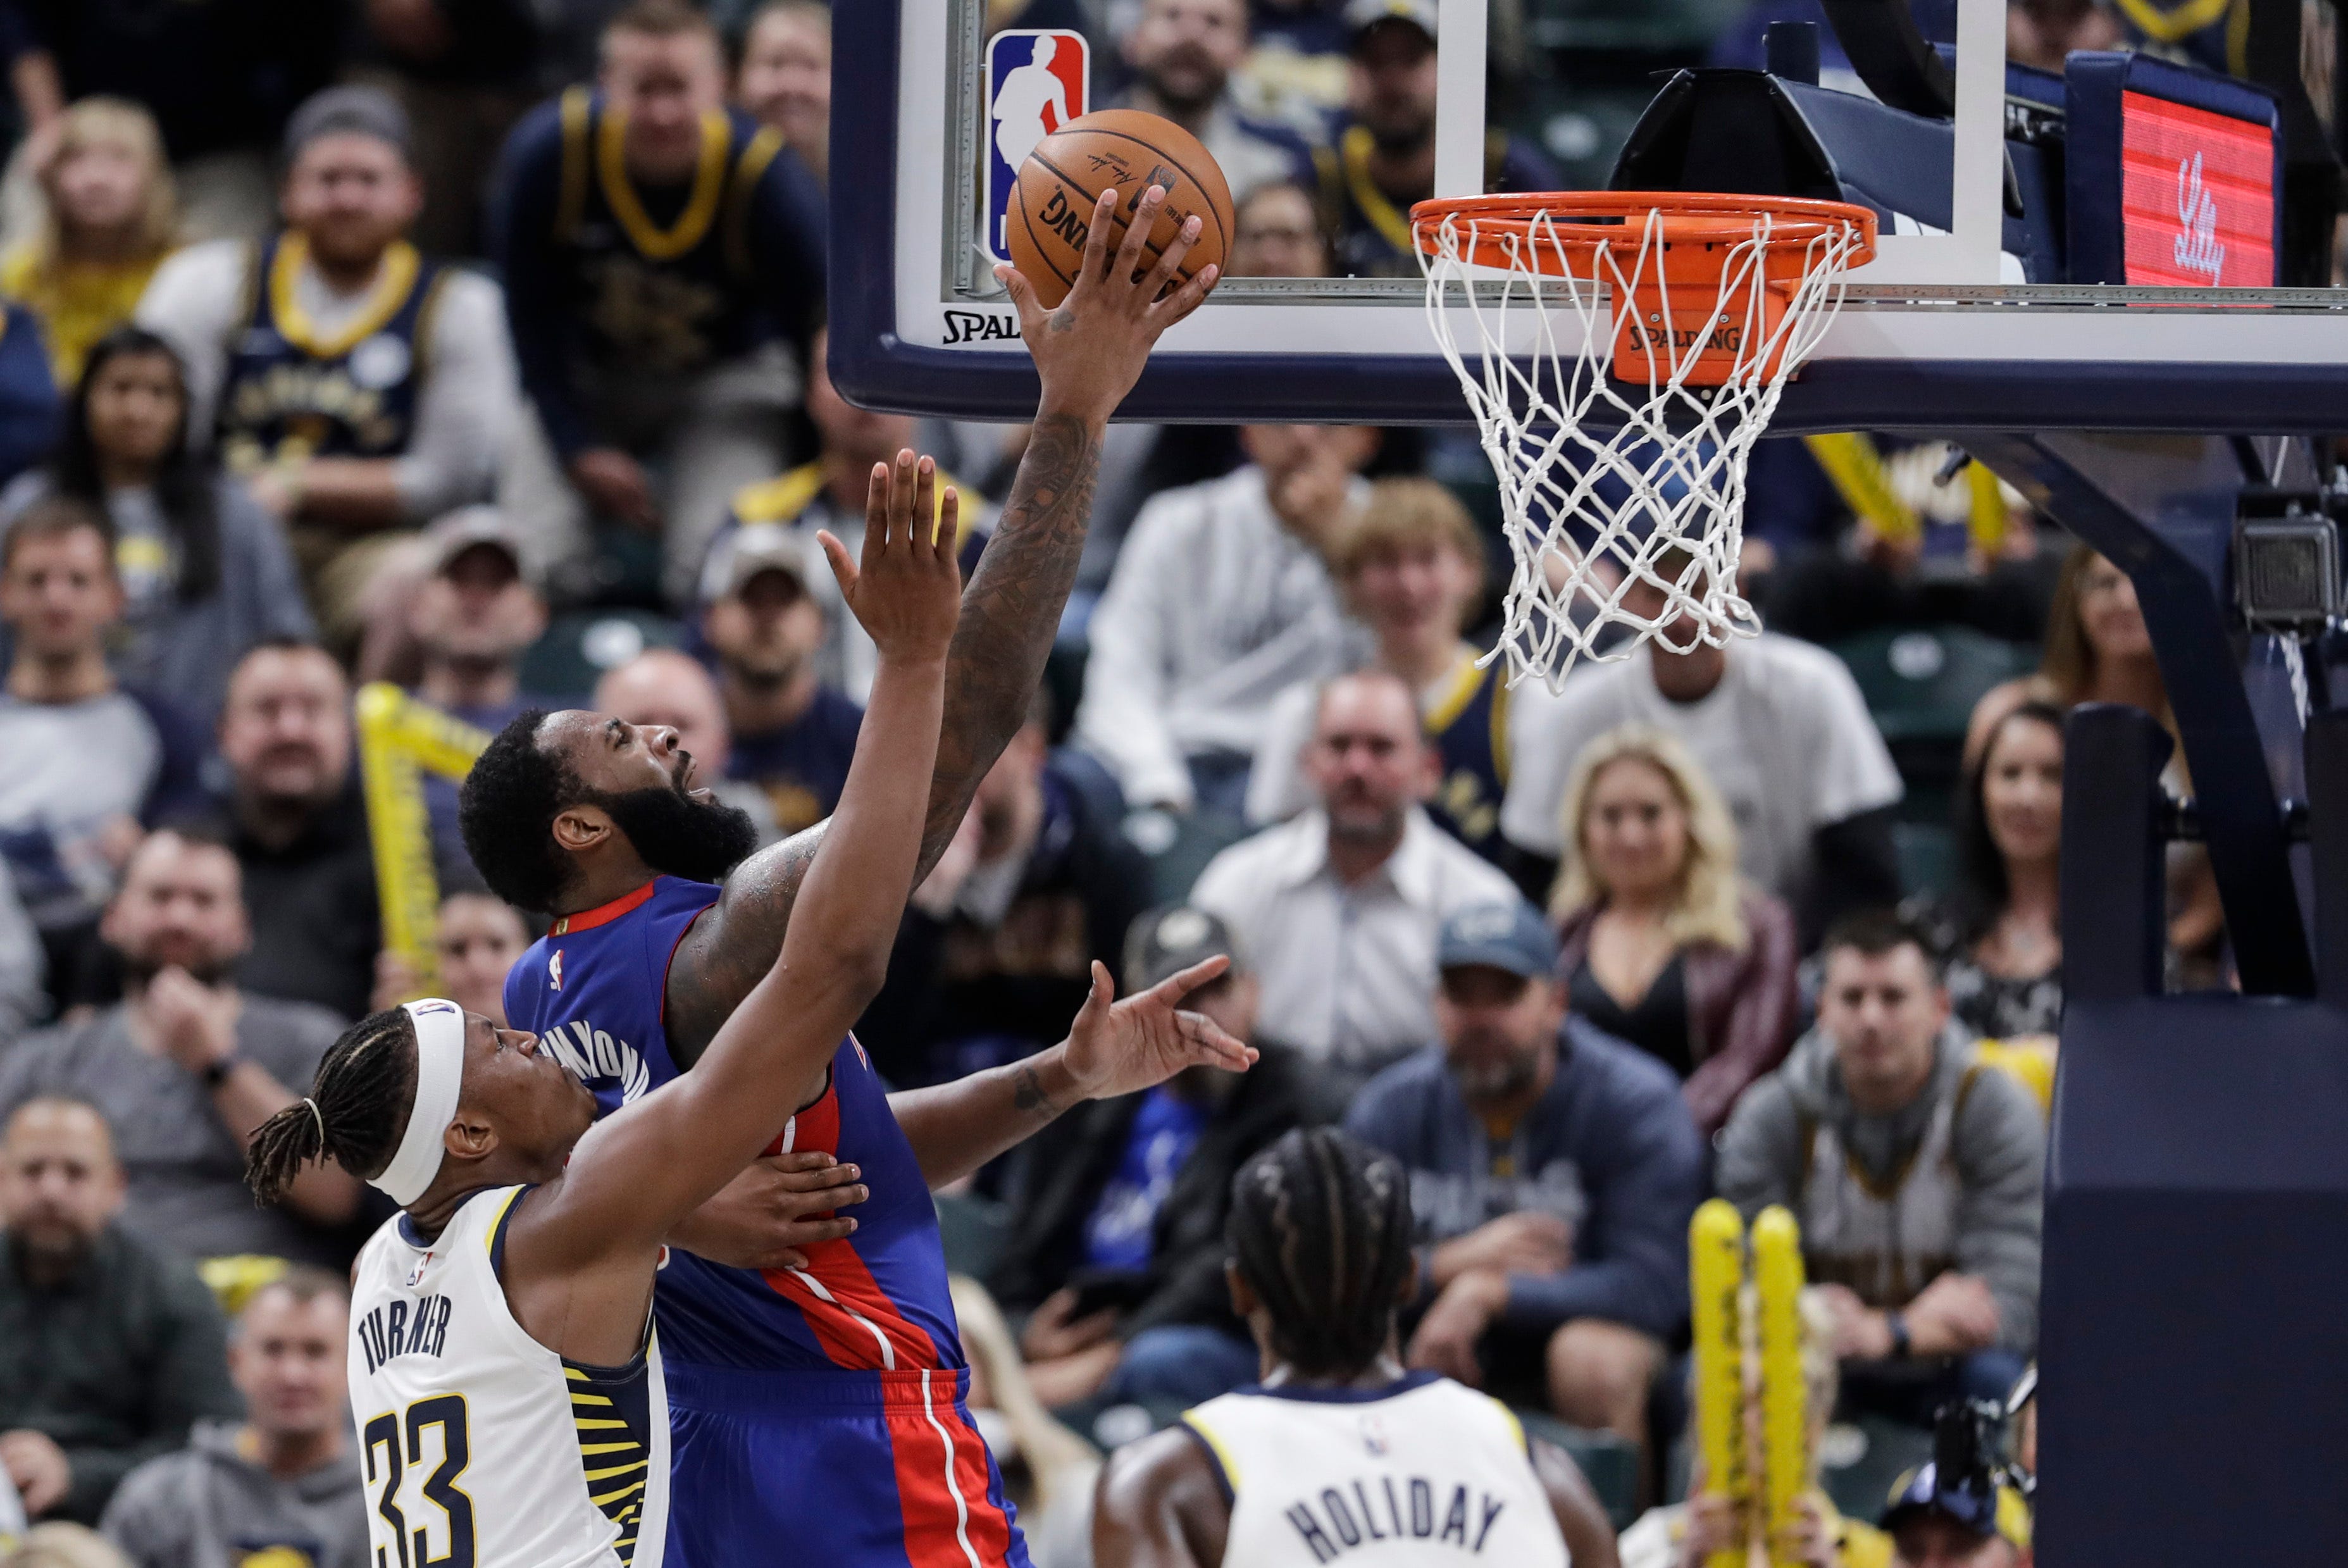 Detroit Pistons' Andre Drummond (0) goes to the basket against Indiana Pacers' Myles Turner (33) during the second half.